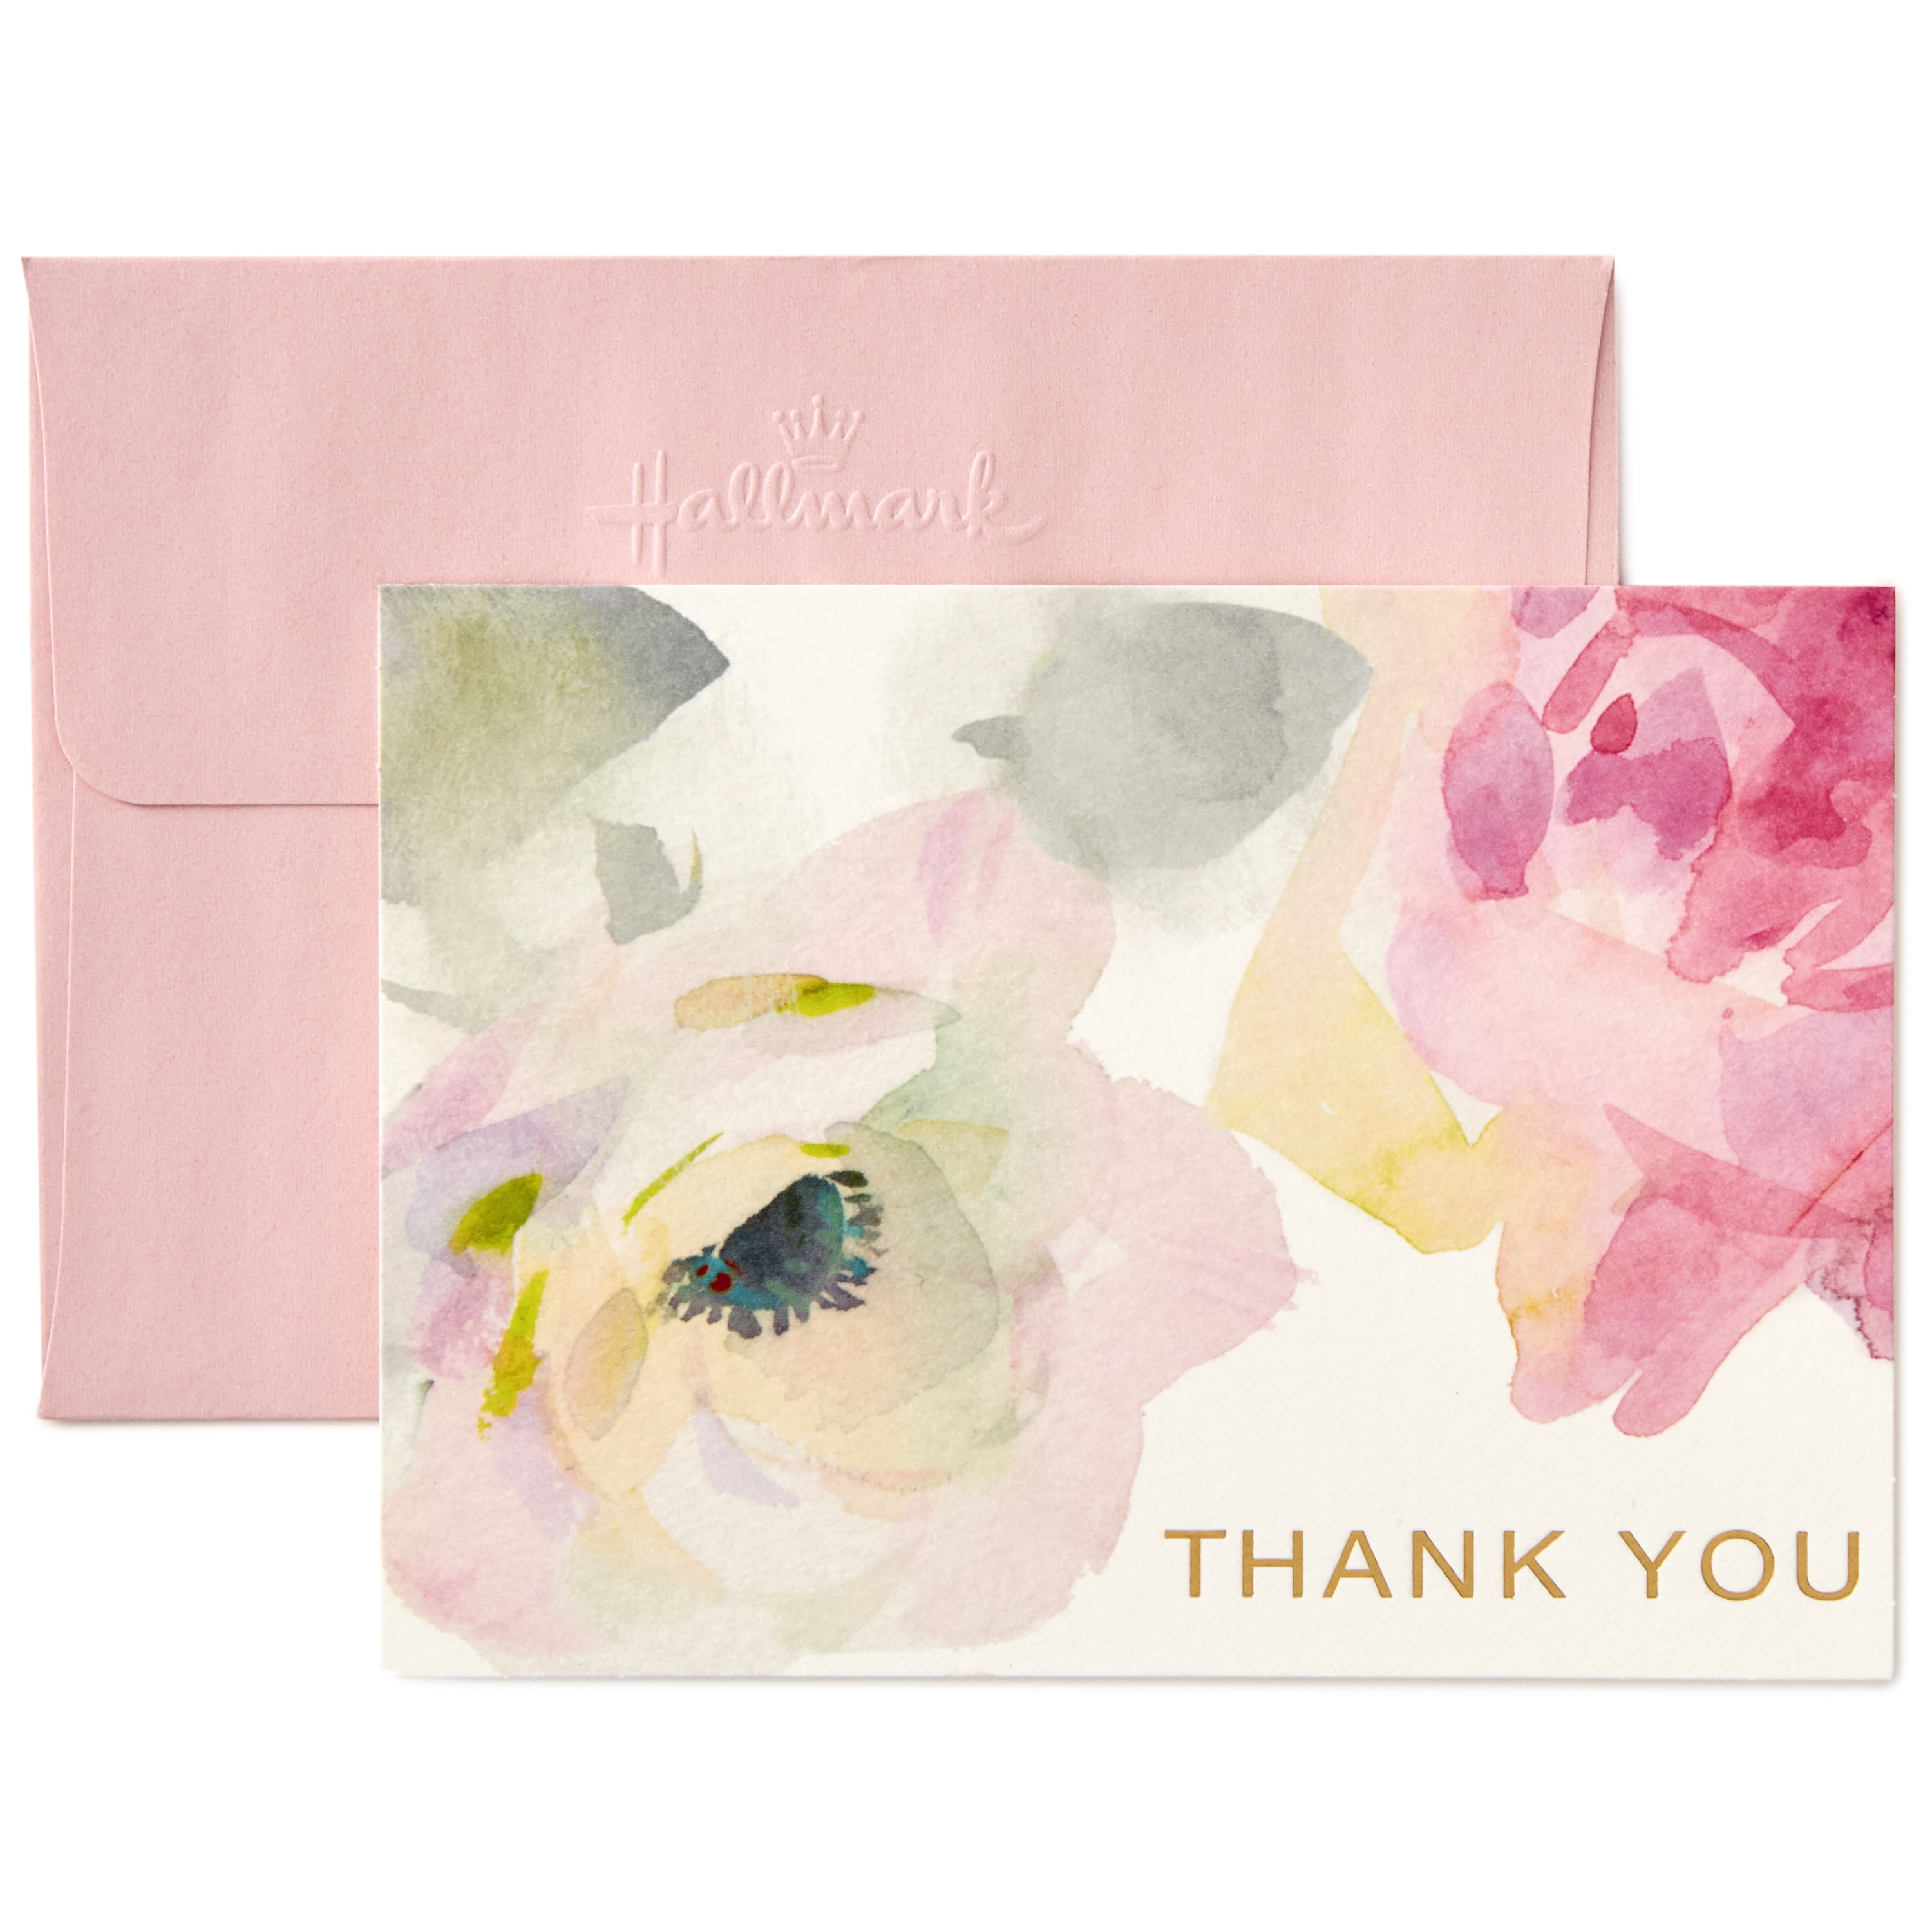 8 Watercolor Note Cards With Envelopes, Featuring a Watercolor